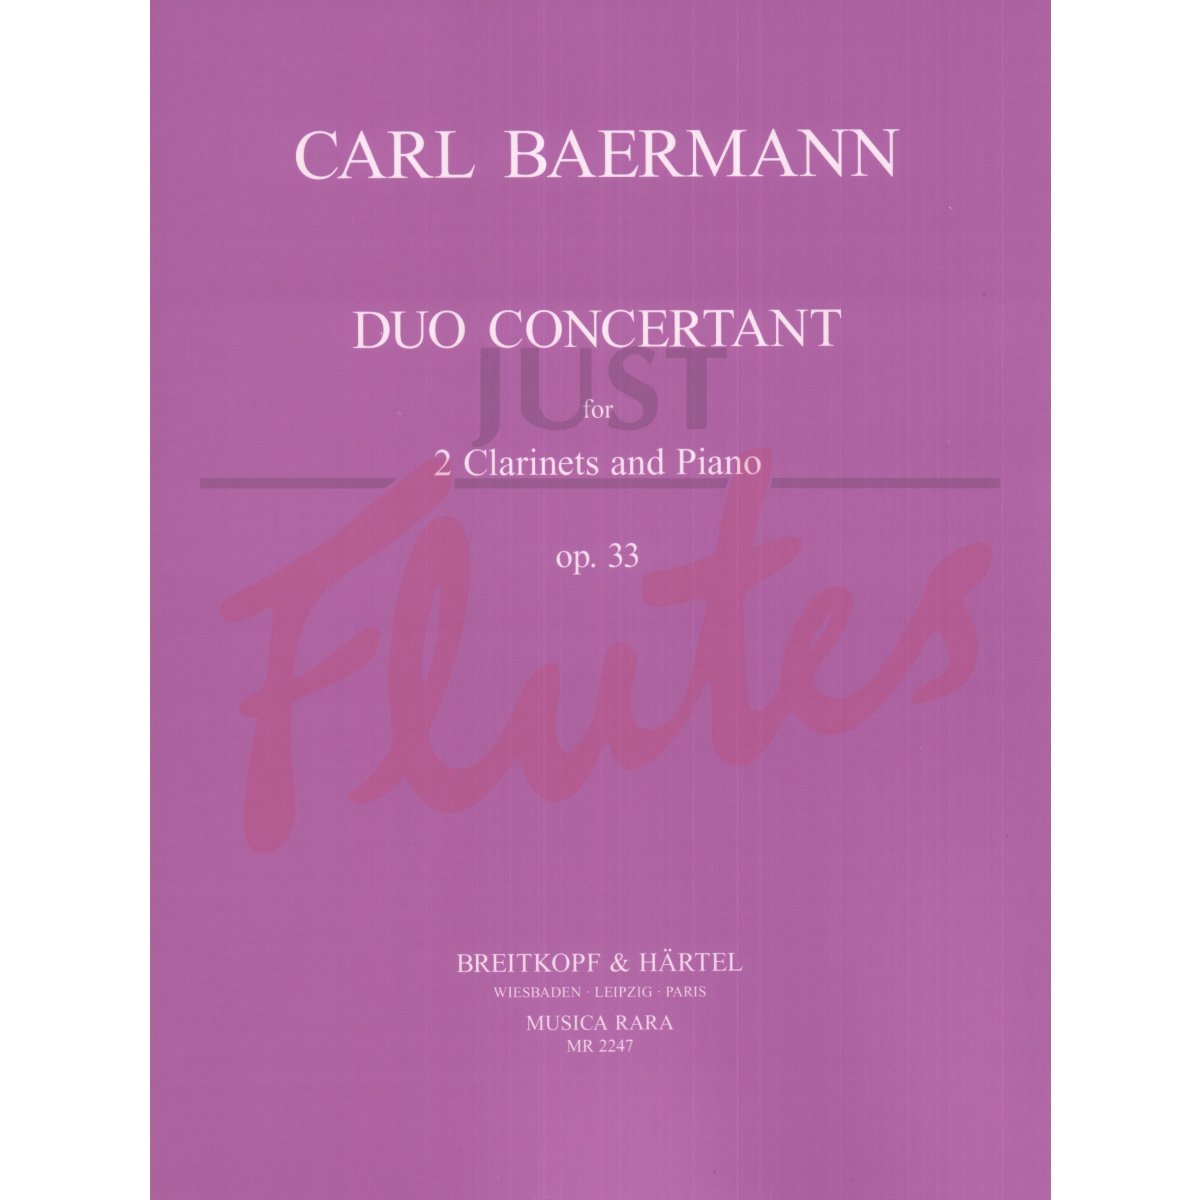 Duo Concertant for Two Clarinets and Piano